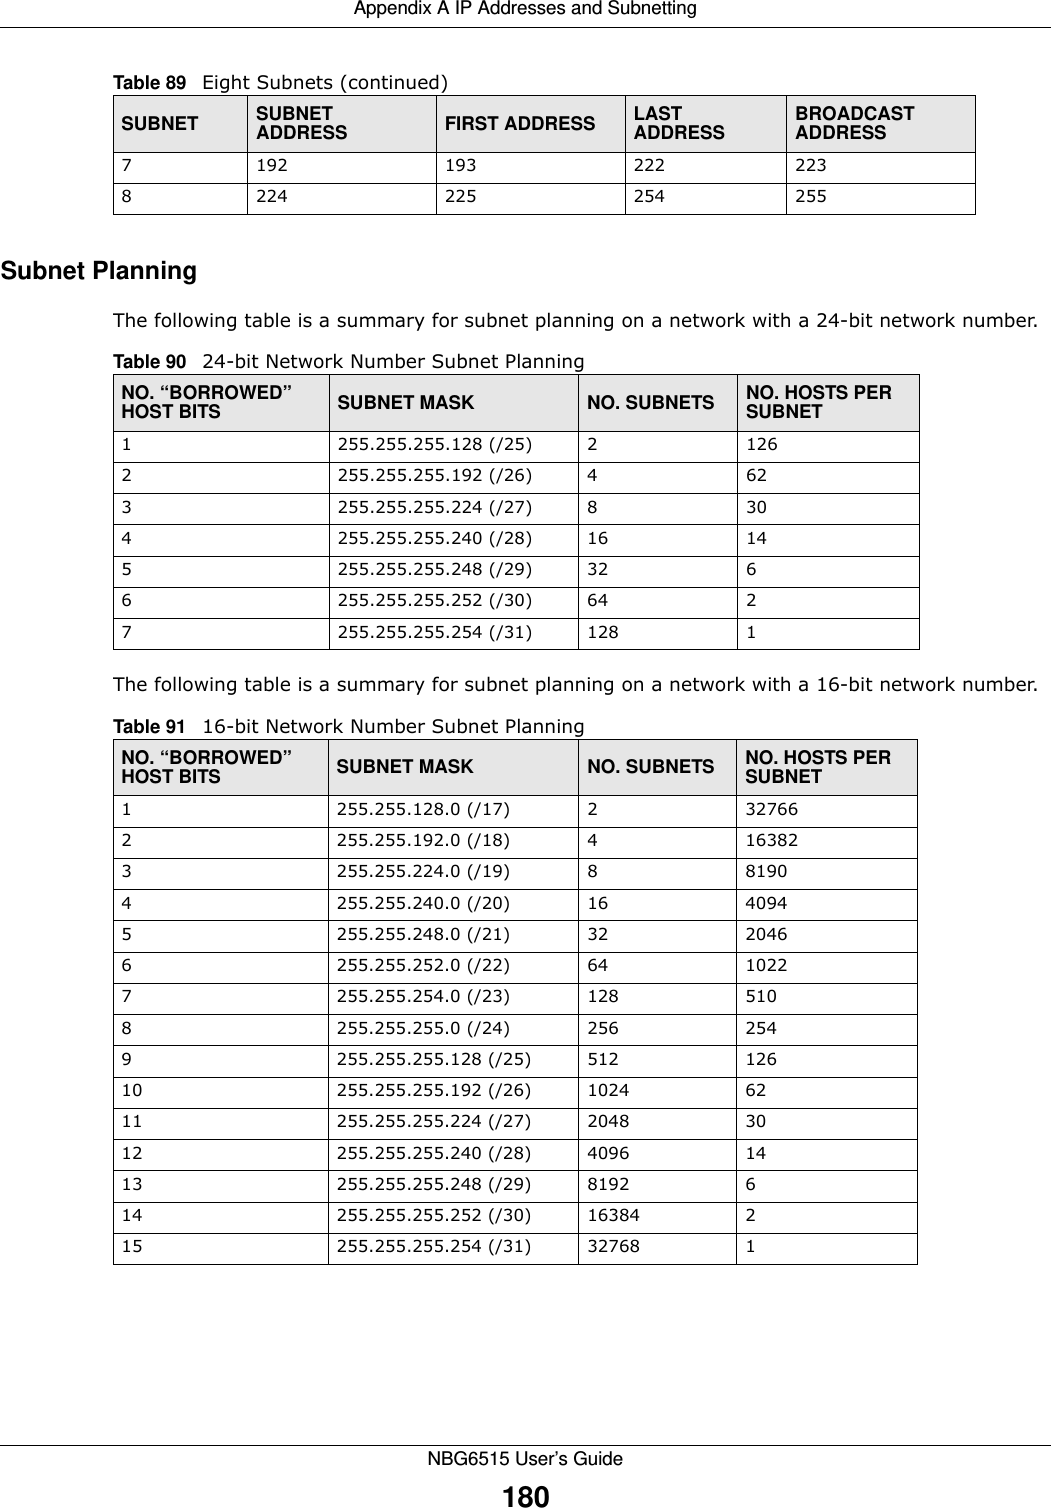 Appendix A IP Addresses and SubnettingNBG6515 User’s Guide180Subnet PlanningThe following table is a summary for subnet planning on a network with a 24-bit network number.The following table is a summary for subnet planning on a network with a 16-bit network number. 7192 193 222 2238224 225 254 255Table 89   Eight Subnets (continued)SUBNET SUBNET ADDRESS FIRST ADDRESS LAST ADDRESSBROADCAST ADDRESSTable 90   24-bit Network Number Subnet PlanningNO. “BORROWED” HOST BITS SUBNET MASK NO. SUBNETS NO. HOSTS PER SUBNET1255.255.255.128 (/25) 21262255.255.255.192 (/26) 4623255.255.255.224 (/27) 8304255.255.255.240 (/28) 16 145255.255.255.248 (/29) 32 66255.255.255.252 (/30) 64 27255.255.255.254 (/31) 128 1Table 91   16-bit Network Number Subnet PlanningNO. “BORROWED” HOST BITS SUBNET MASK NO. SUBNETS NO. HOSTS PER SUBNET1255.255.128.0 (/17) 2327662255.255.192.0 (/18) 4163823255.255.224.0 (/19) 881904255.255.240.0 (/20) 16 40945255.255.248.0 (/21) 32 20466255.255.252.0 (/22) 64 10227255.255.254.0 (/23) 128 5108255.255.255.0 (/24) 256 2549255.255.255.128 (/25) 512 12610 255.255.255.192 (/26) 1024 6211 255.255.255.224 (/27) 2048 3012 255.255.255.240 (/28) 4096 1413 255.255.255.248 (/29) 8192 614 255.255.255.252 (/30) 16384 215 255.255.255.254 (/31) 32768 1